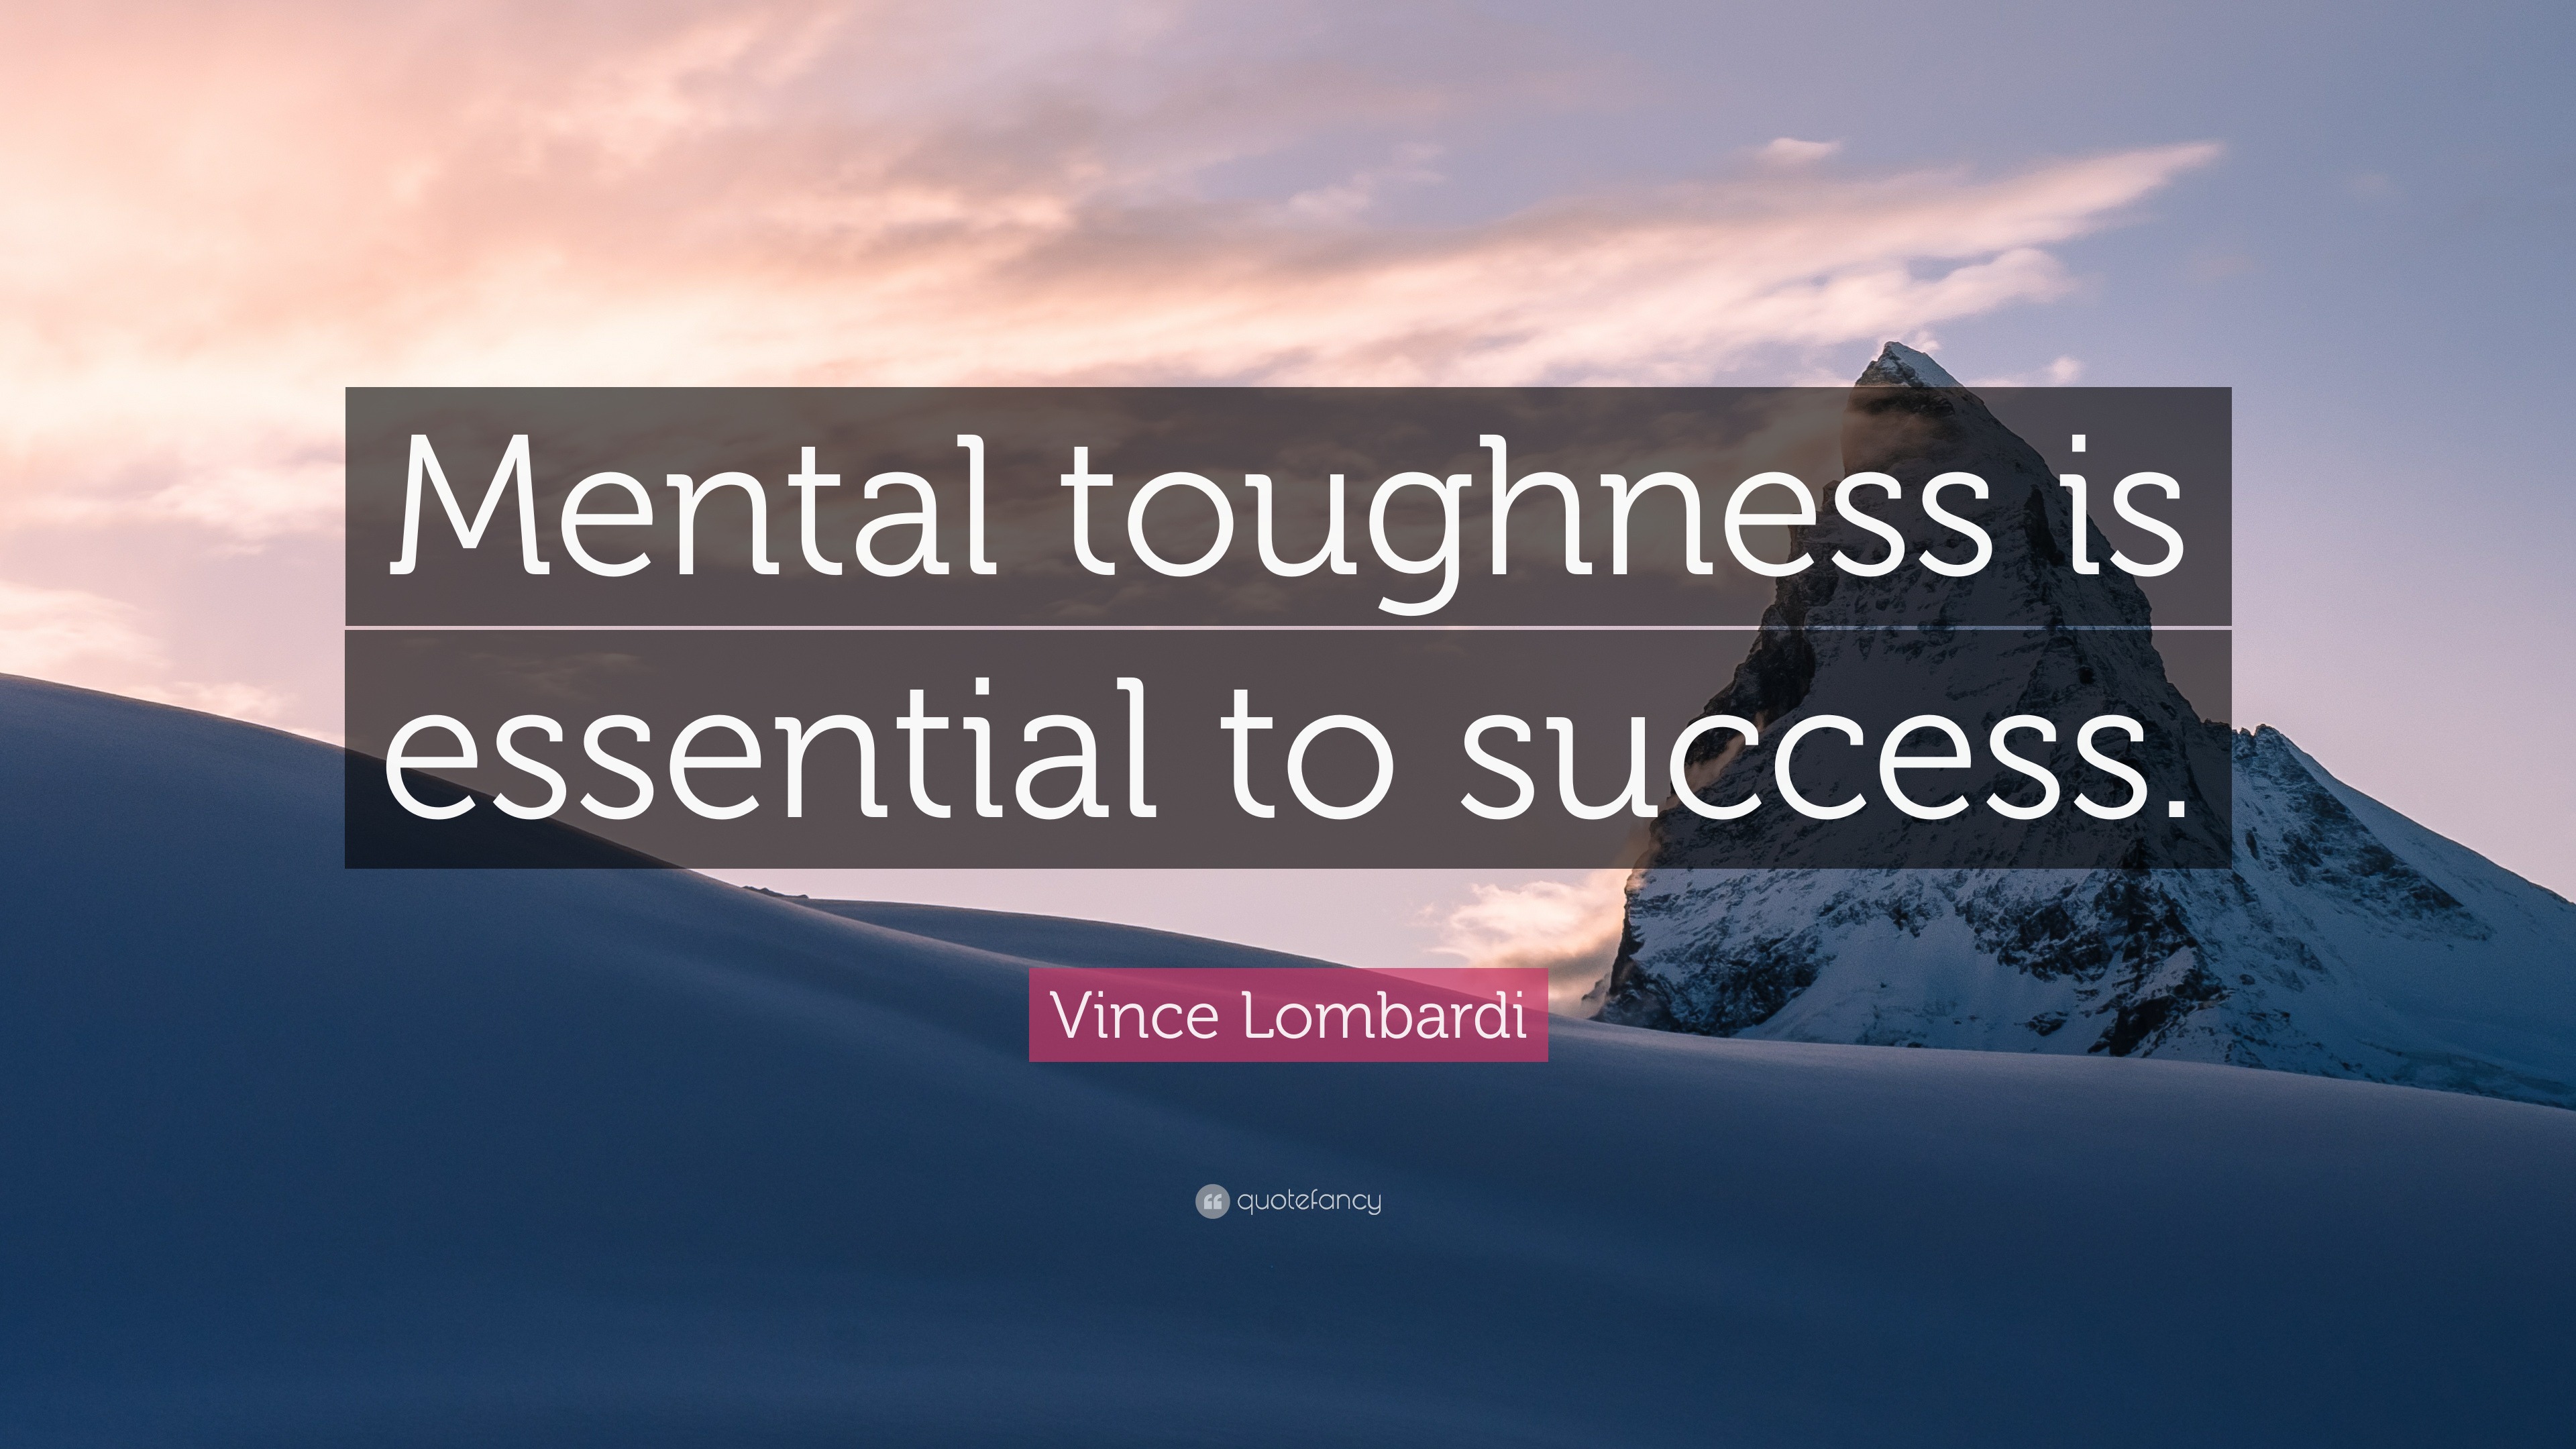 Vince Lombardi Quote: “Mental toughness is essential to success.” (12